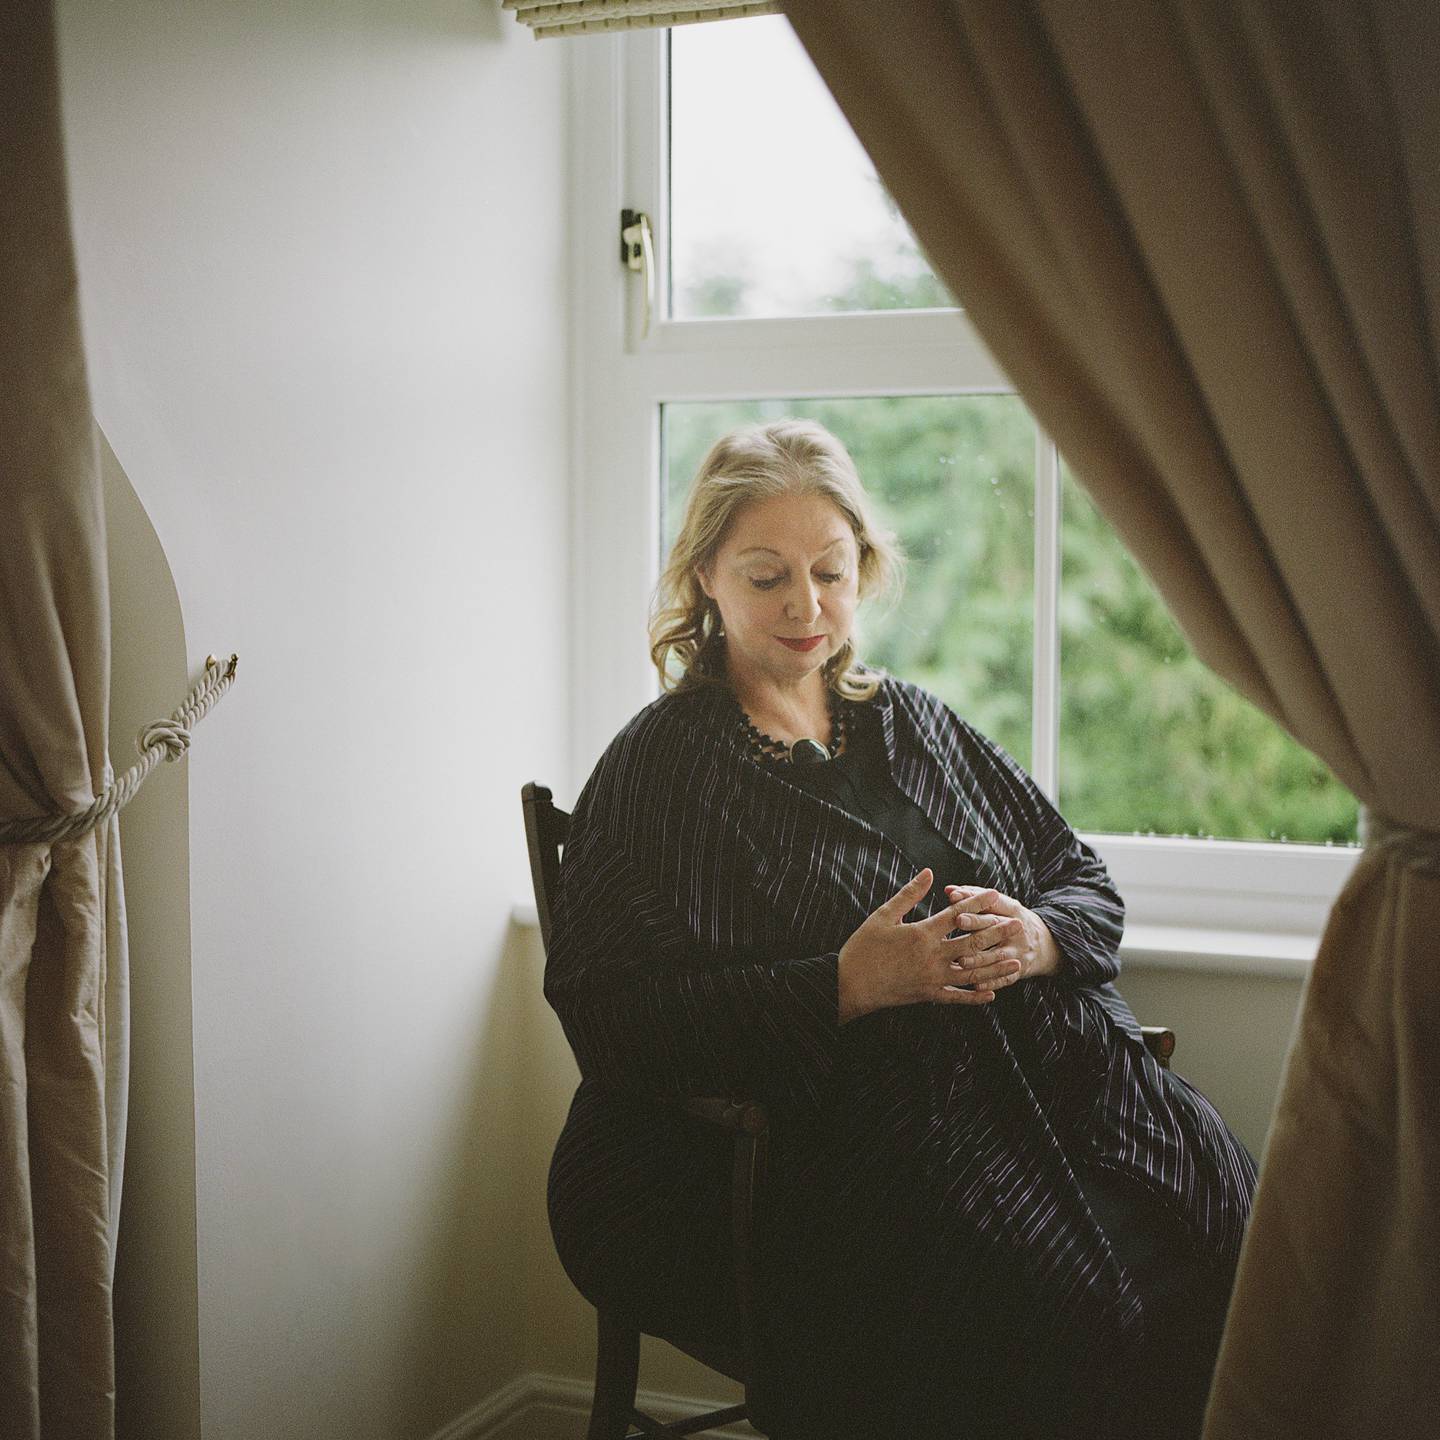 Hilary Mantel, prize-winning author of historical fiction, in London on Feb. 23, 2020. The beauty of MantelÕs prose, her sly, unexpected use of language, the emotional resonance braided into the narrative Ñ all these propel you along. Foto: Ellie Smith / The New York Times / NTB